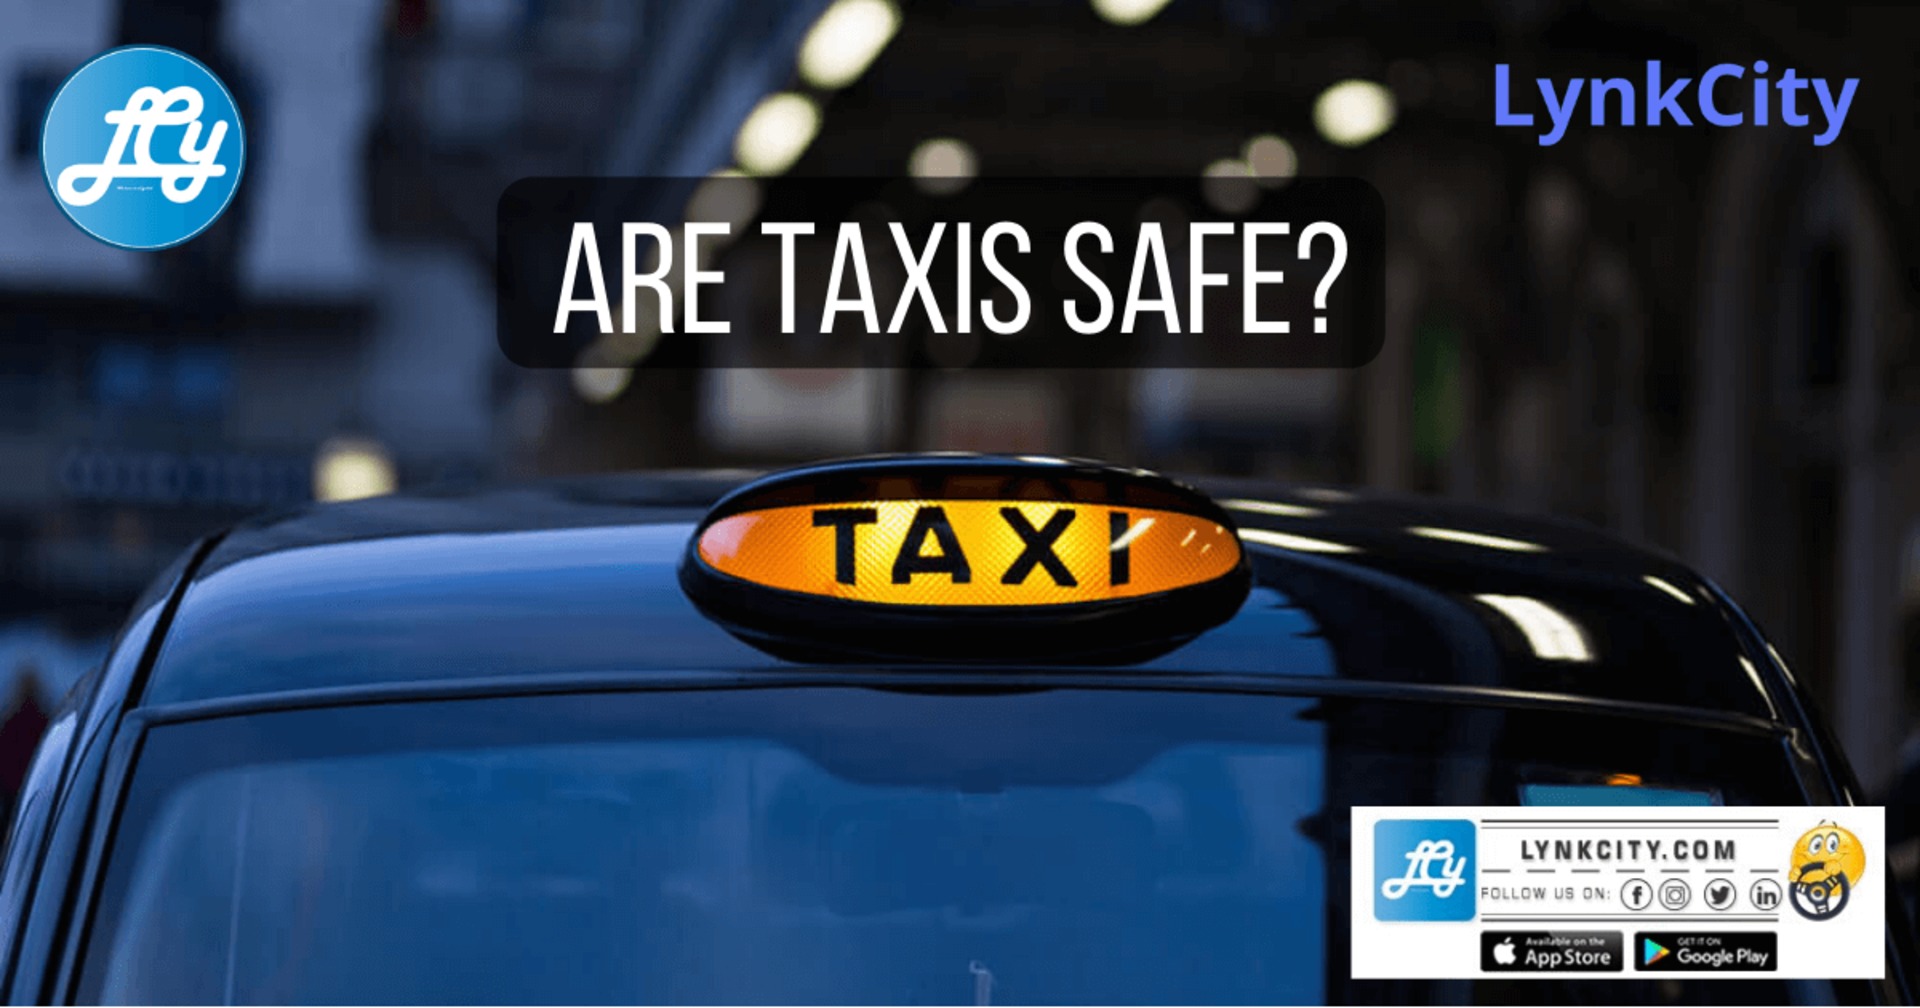 Are Taxis Safe? image